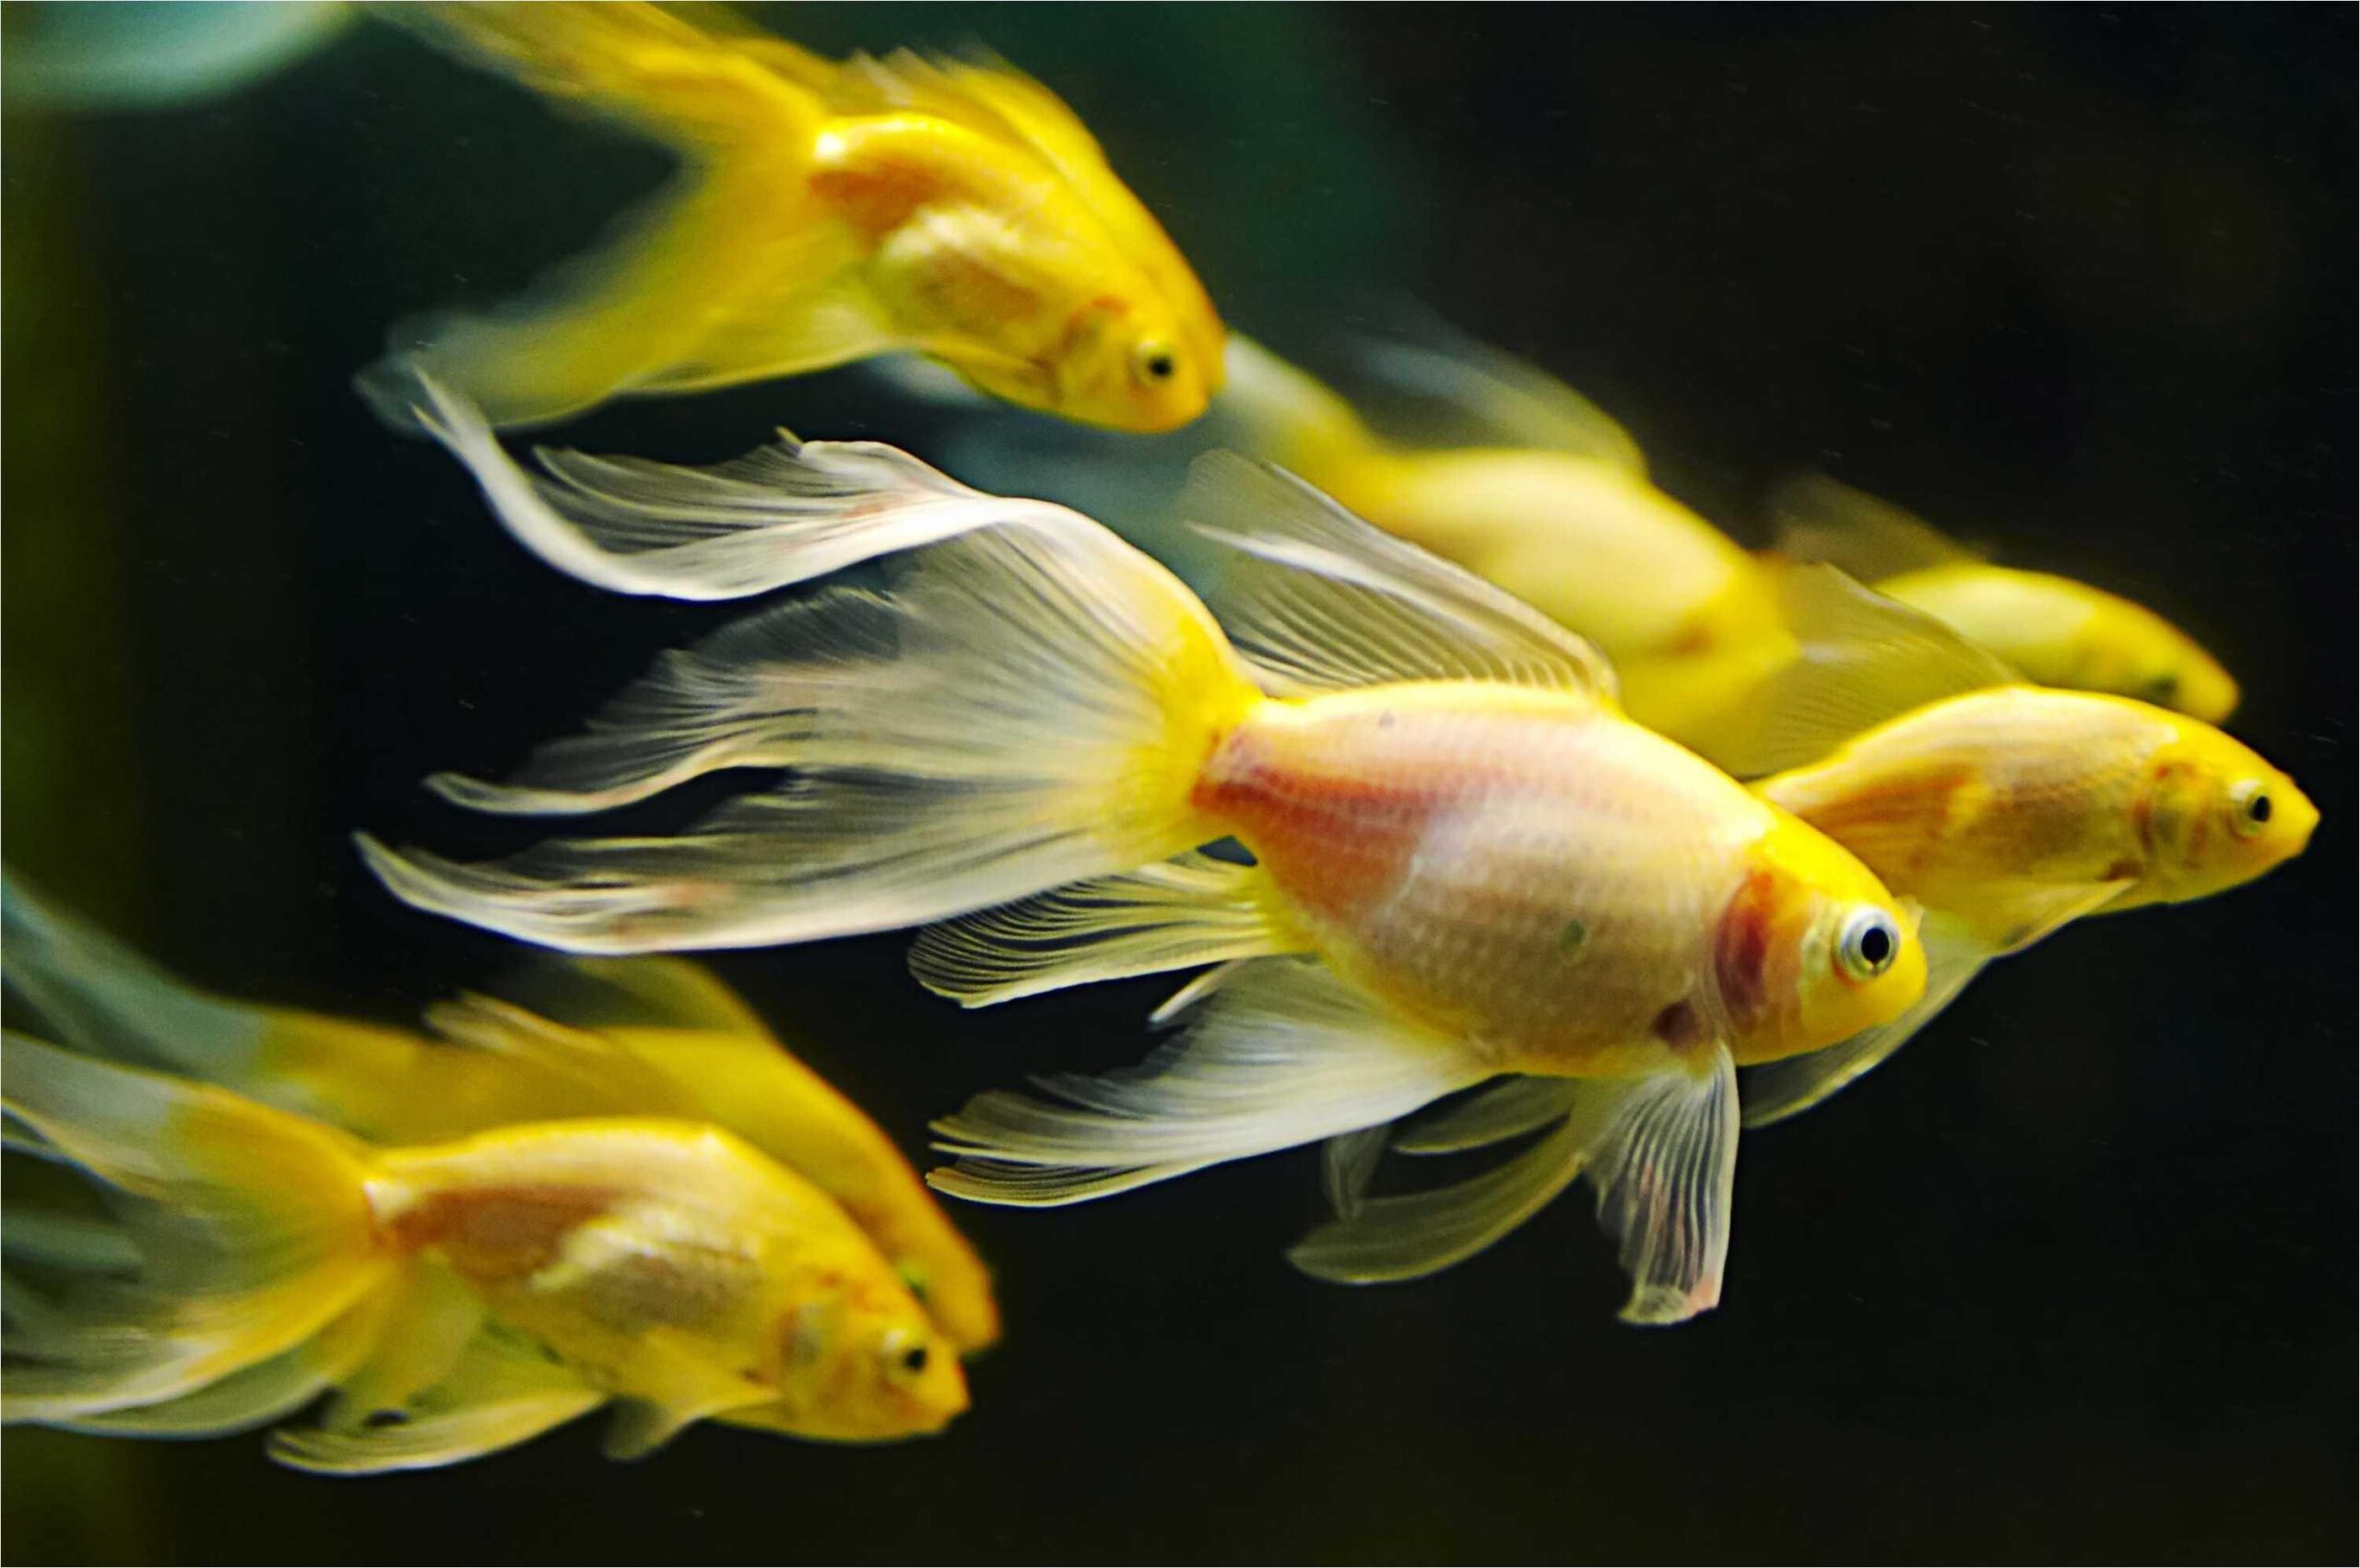 Gold Fish Wallpapers